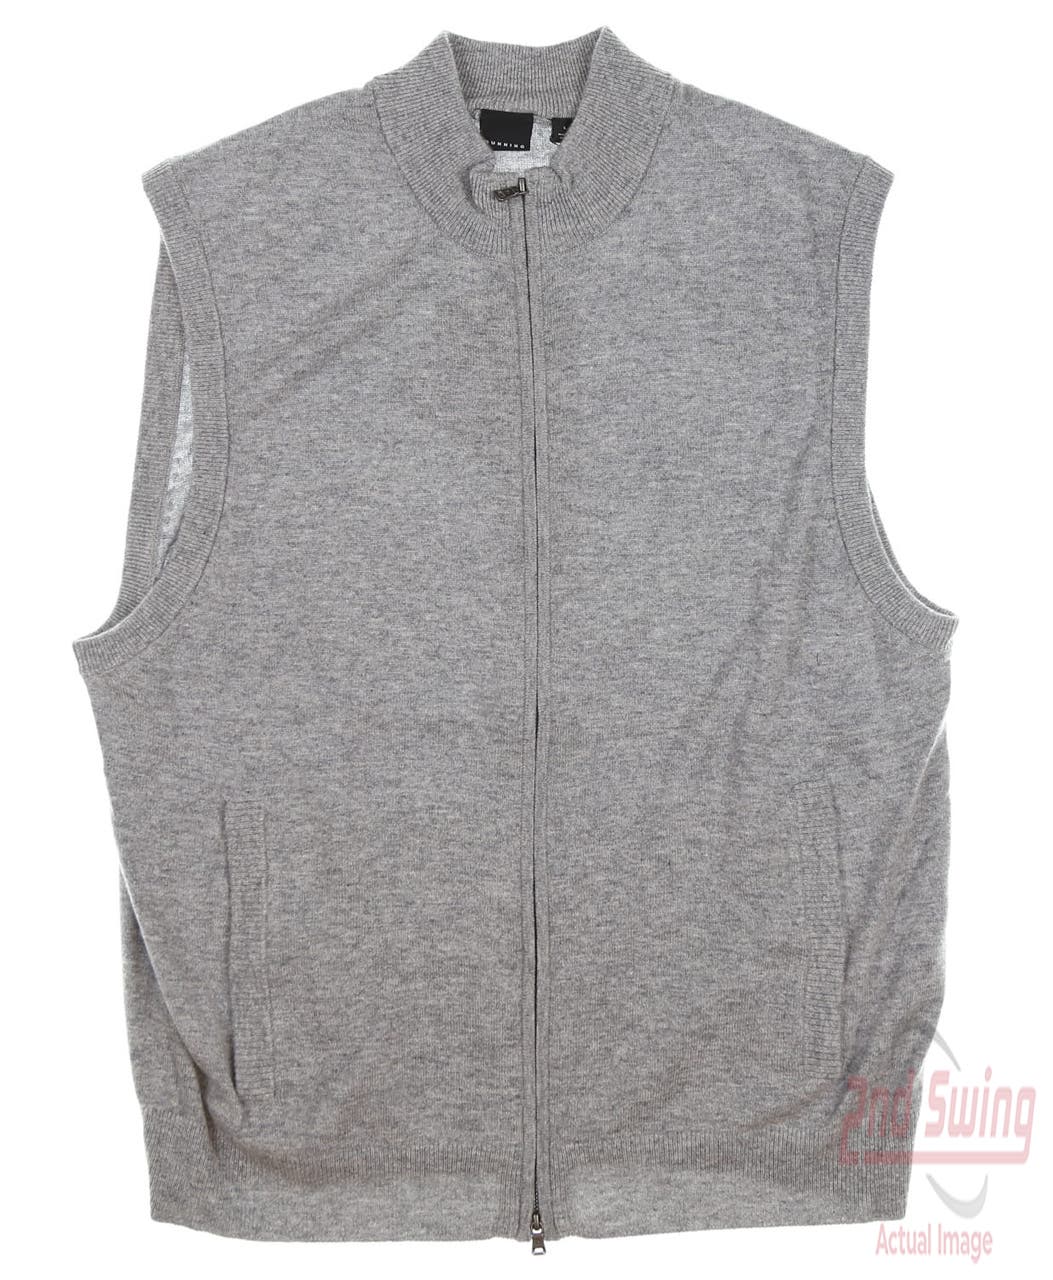 New Mens Dunning Lagmore Wool and Cashmere Full Zip Vest Large L Gray Heather MSRP $300